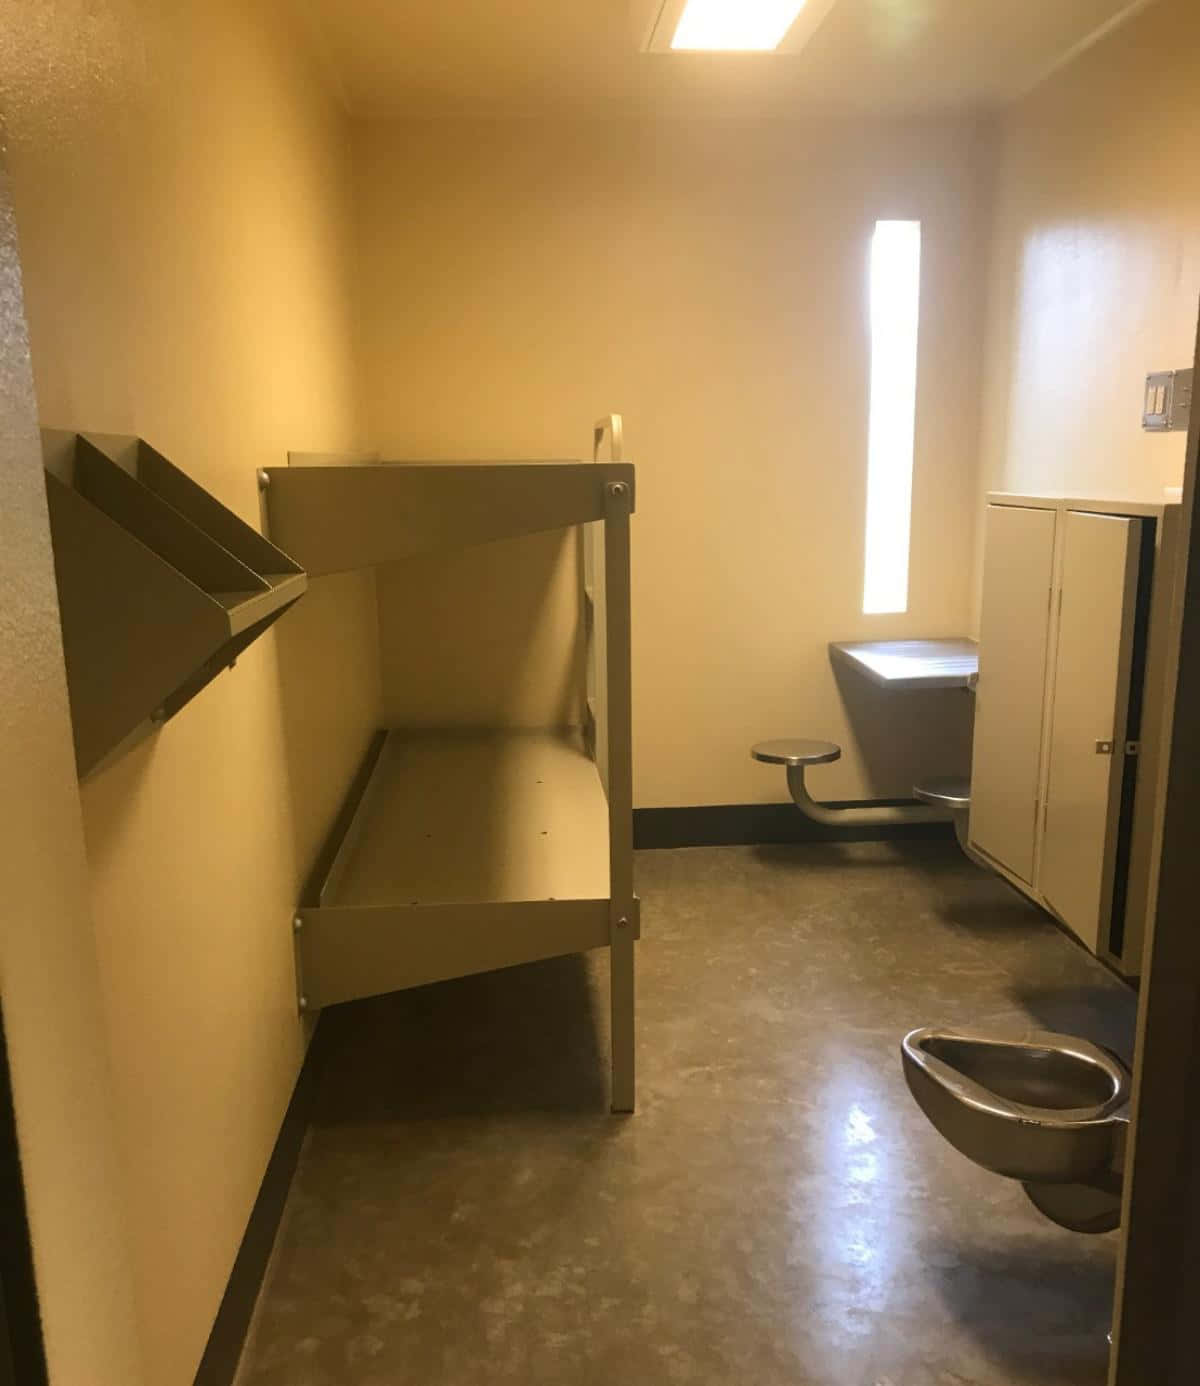 A Room With A Toilet And A Sink